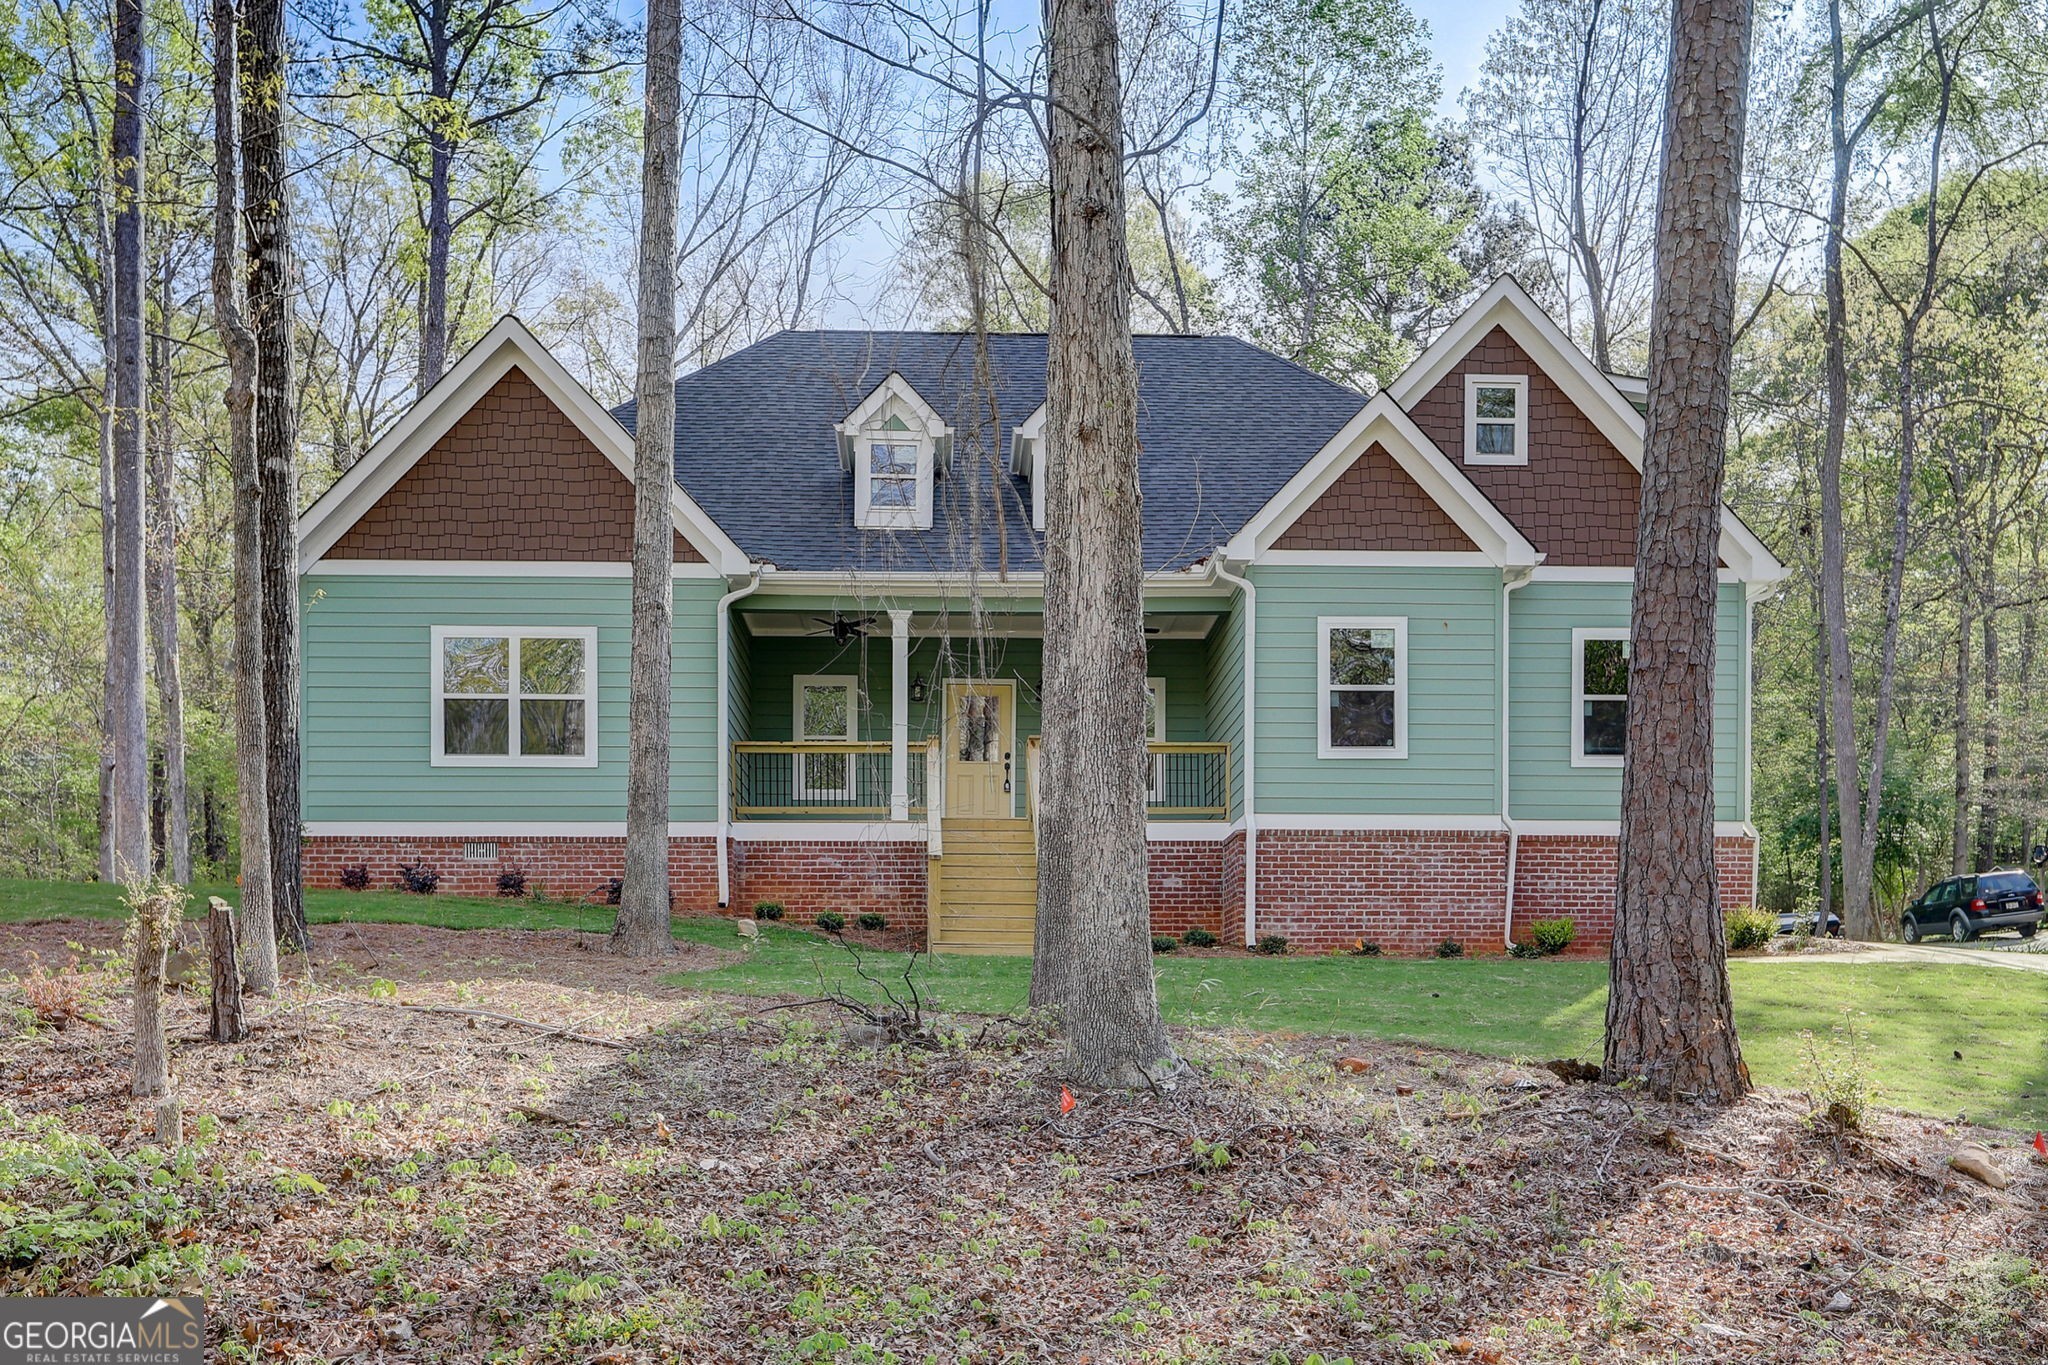 2. 990 Whippoorwill Road